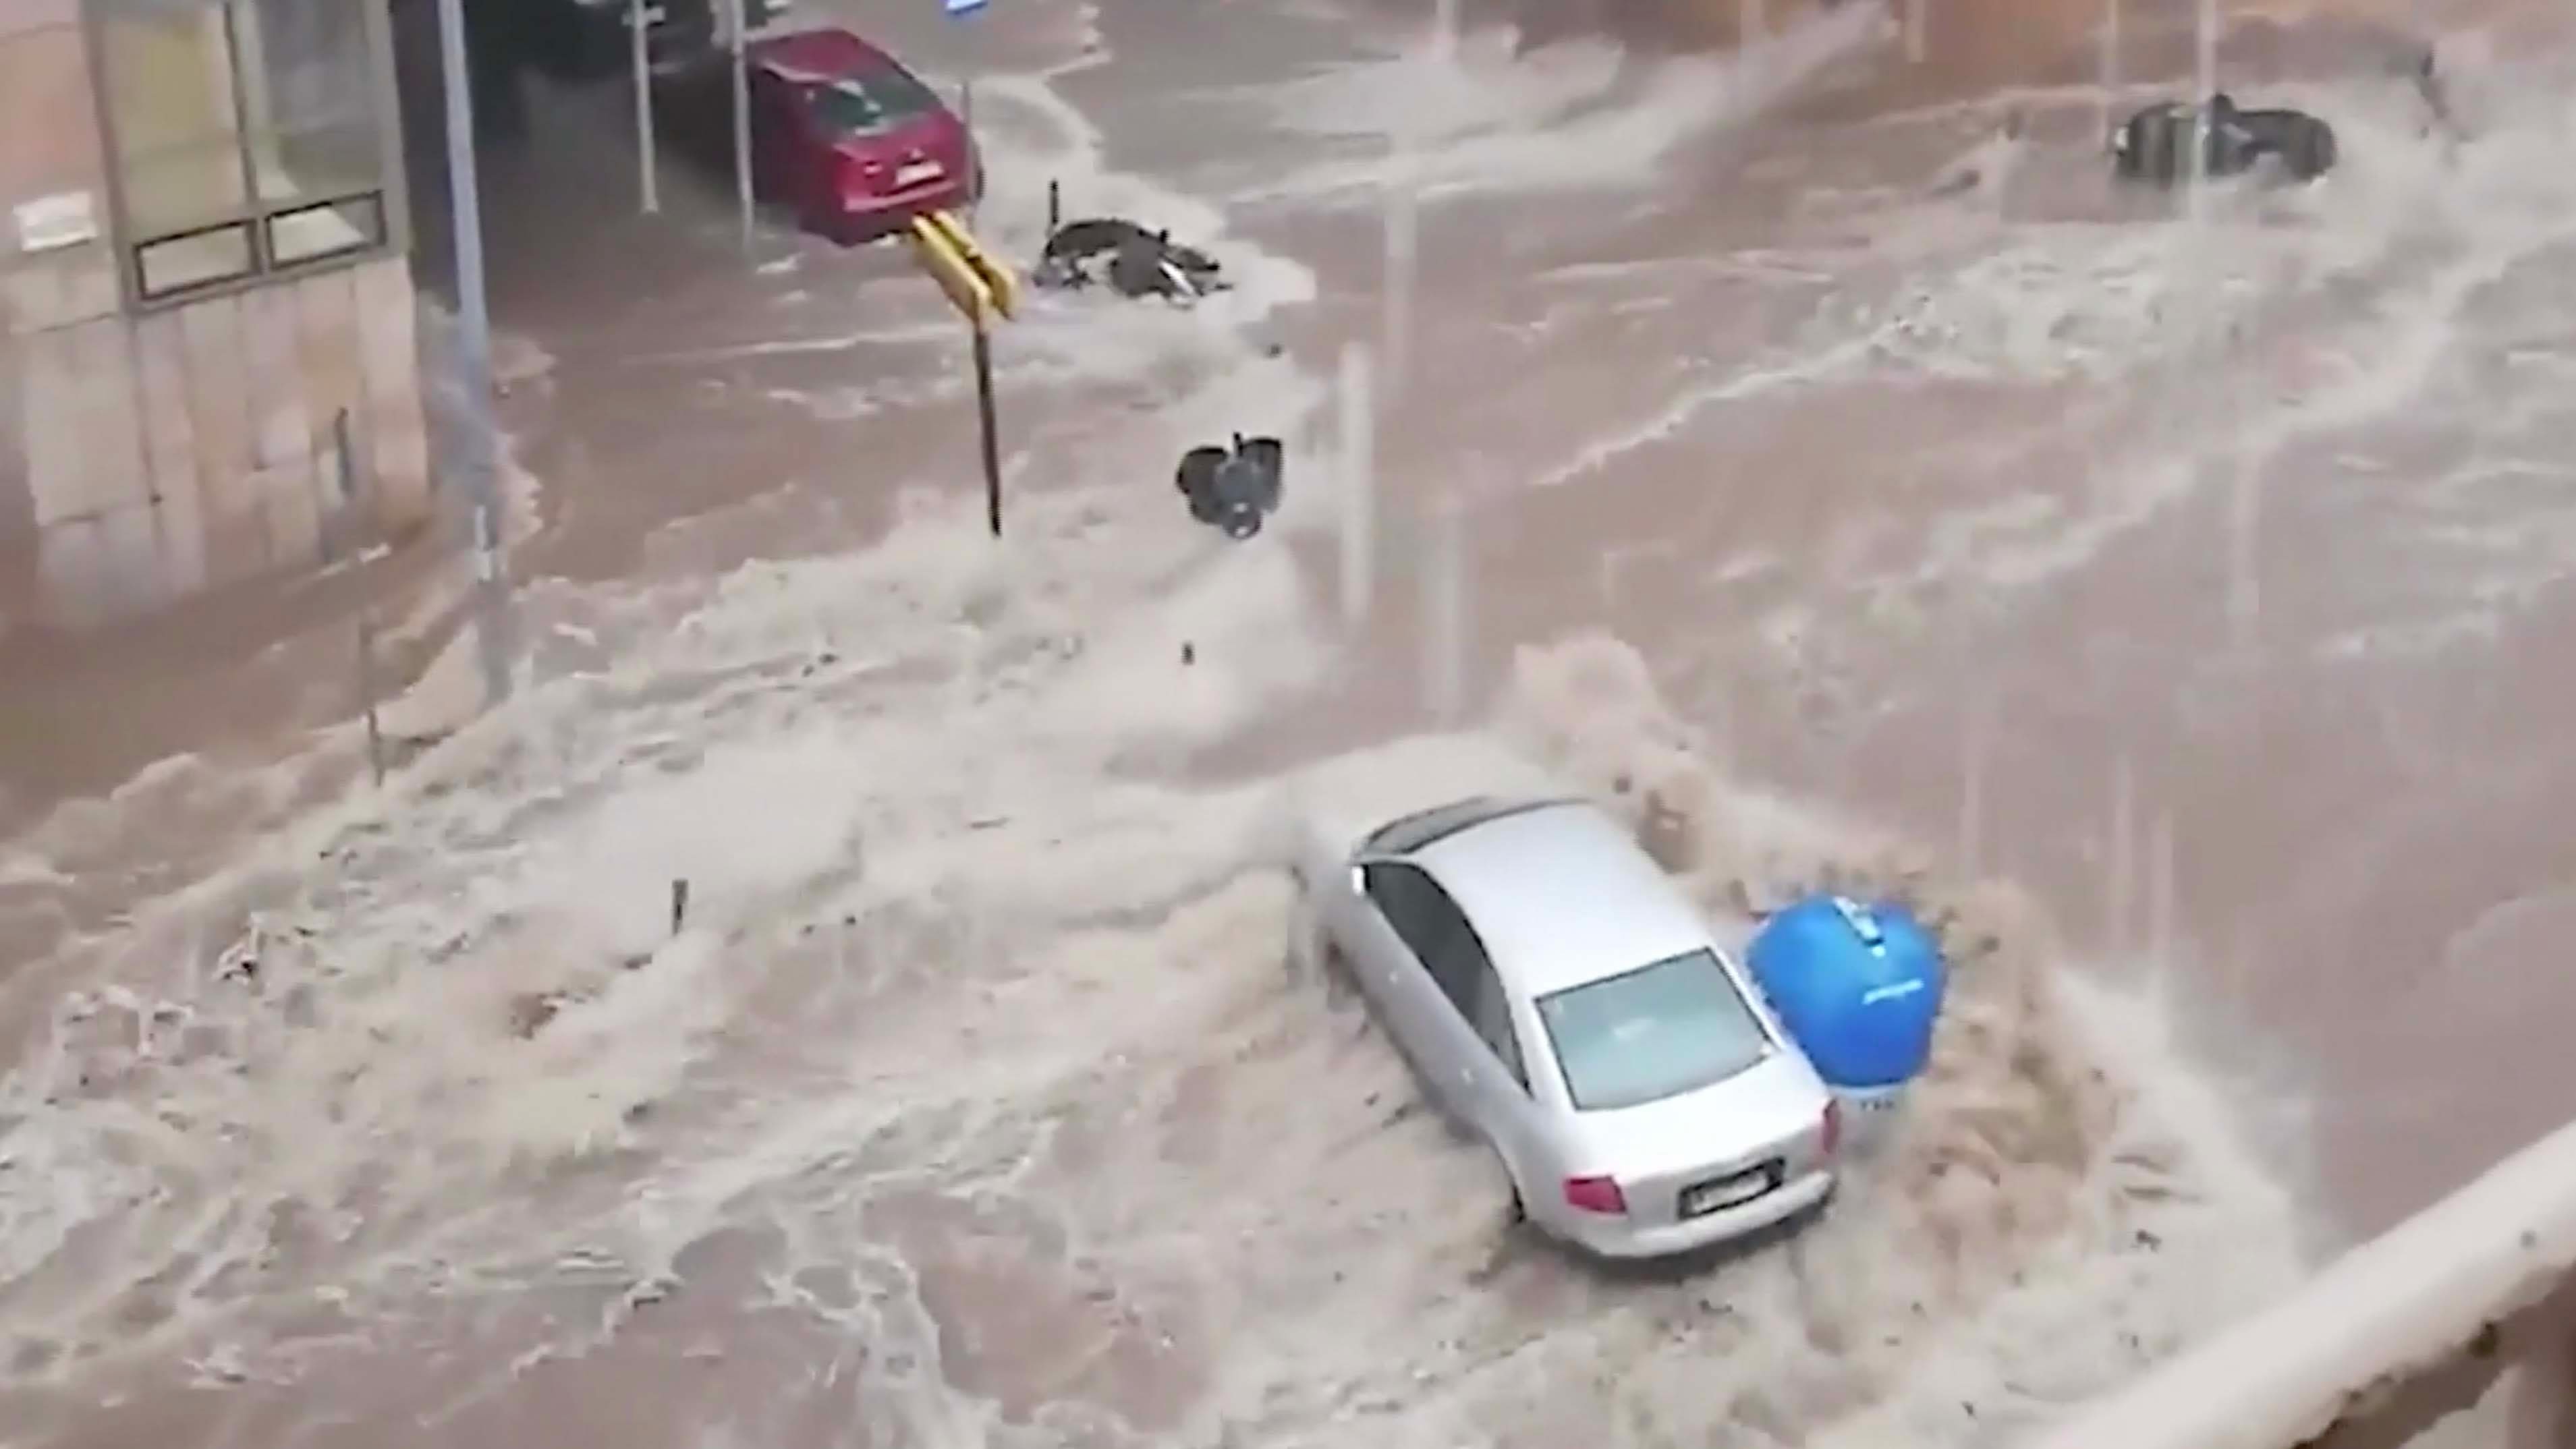 Flooding has caused chaos as streets have turned into gushing rivers in ...